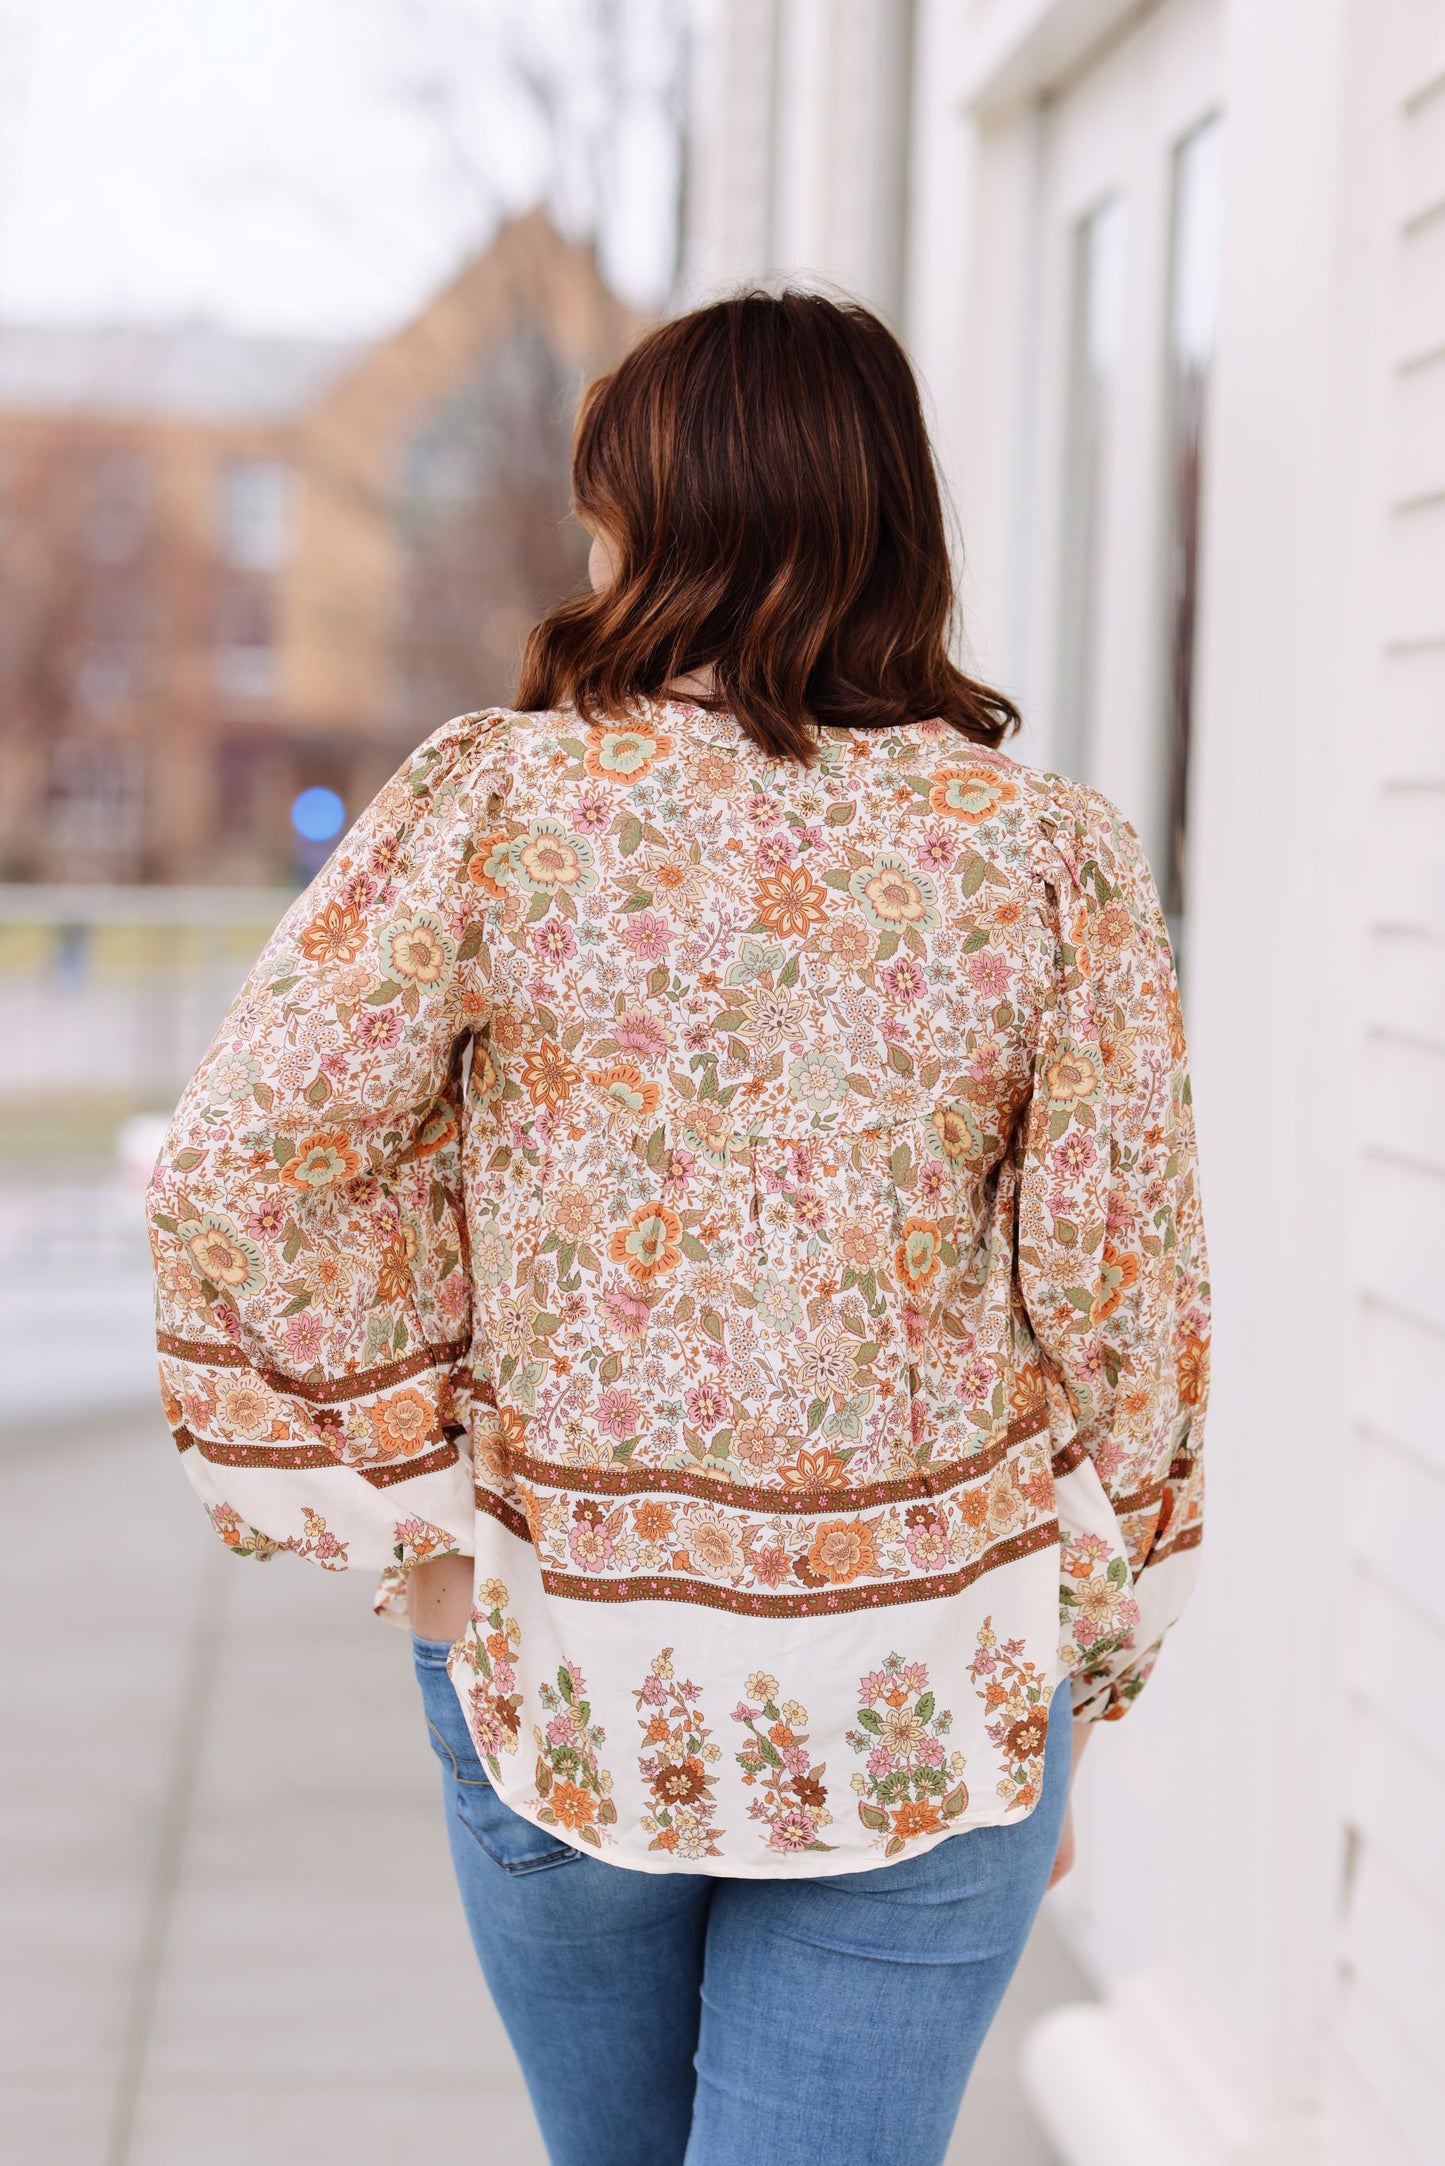 Spring is Here Border Print Blouse